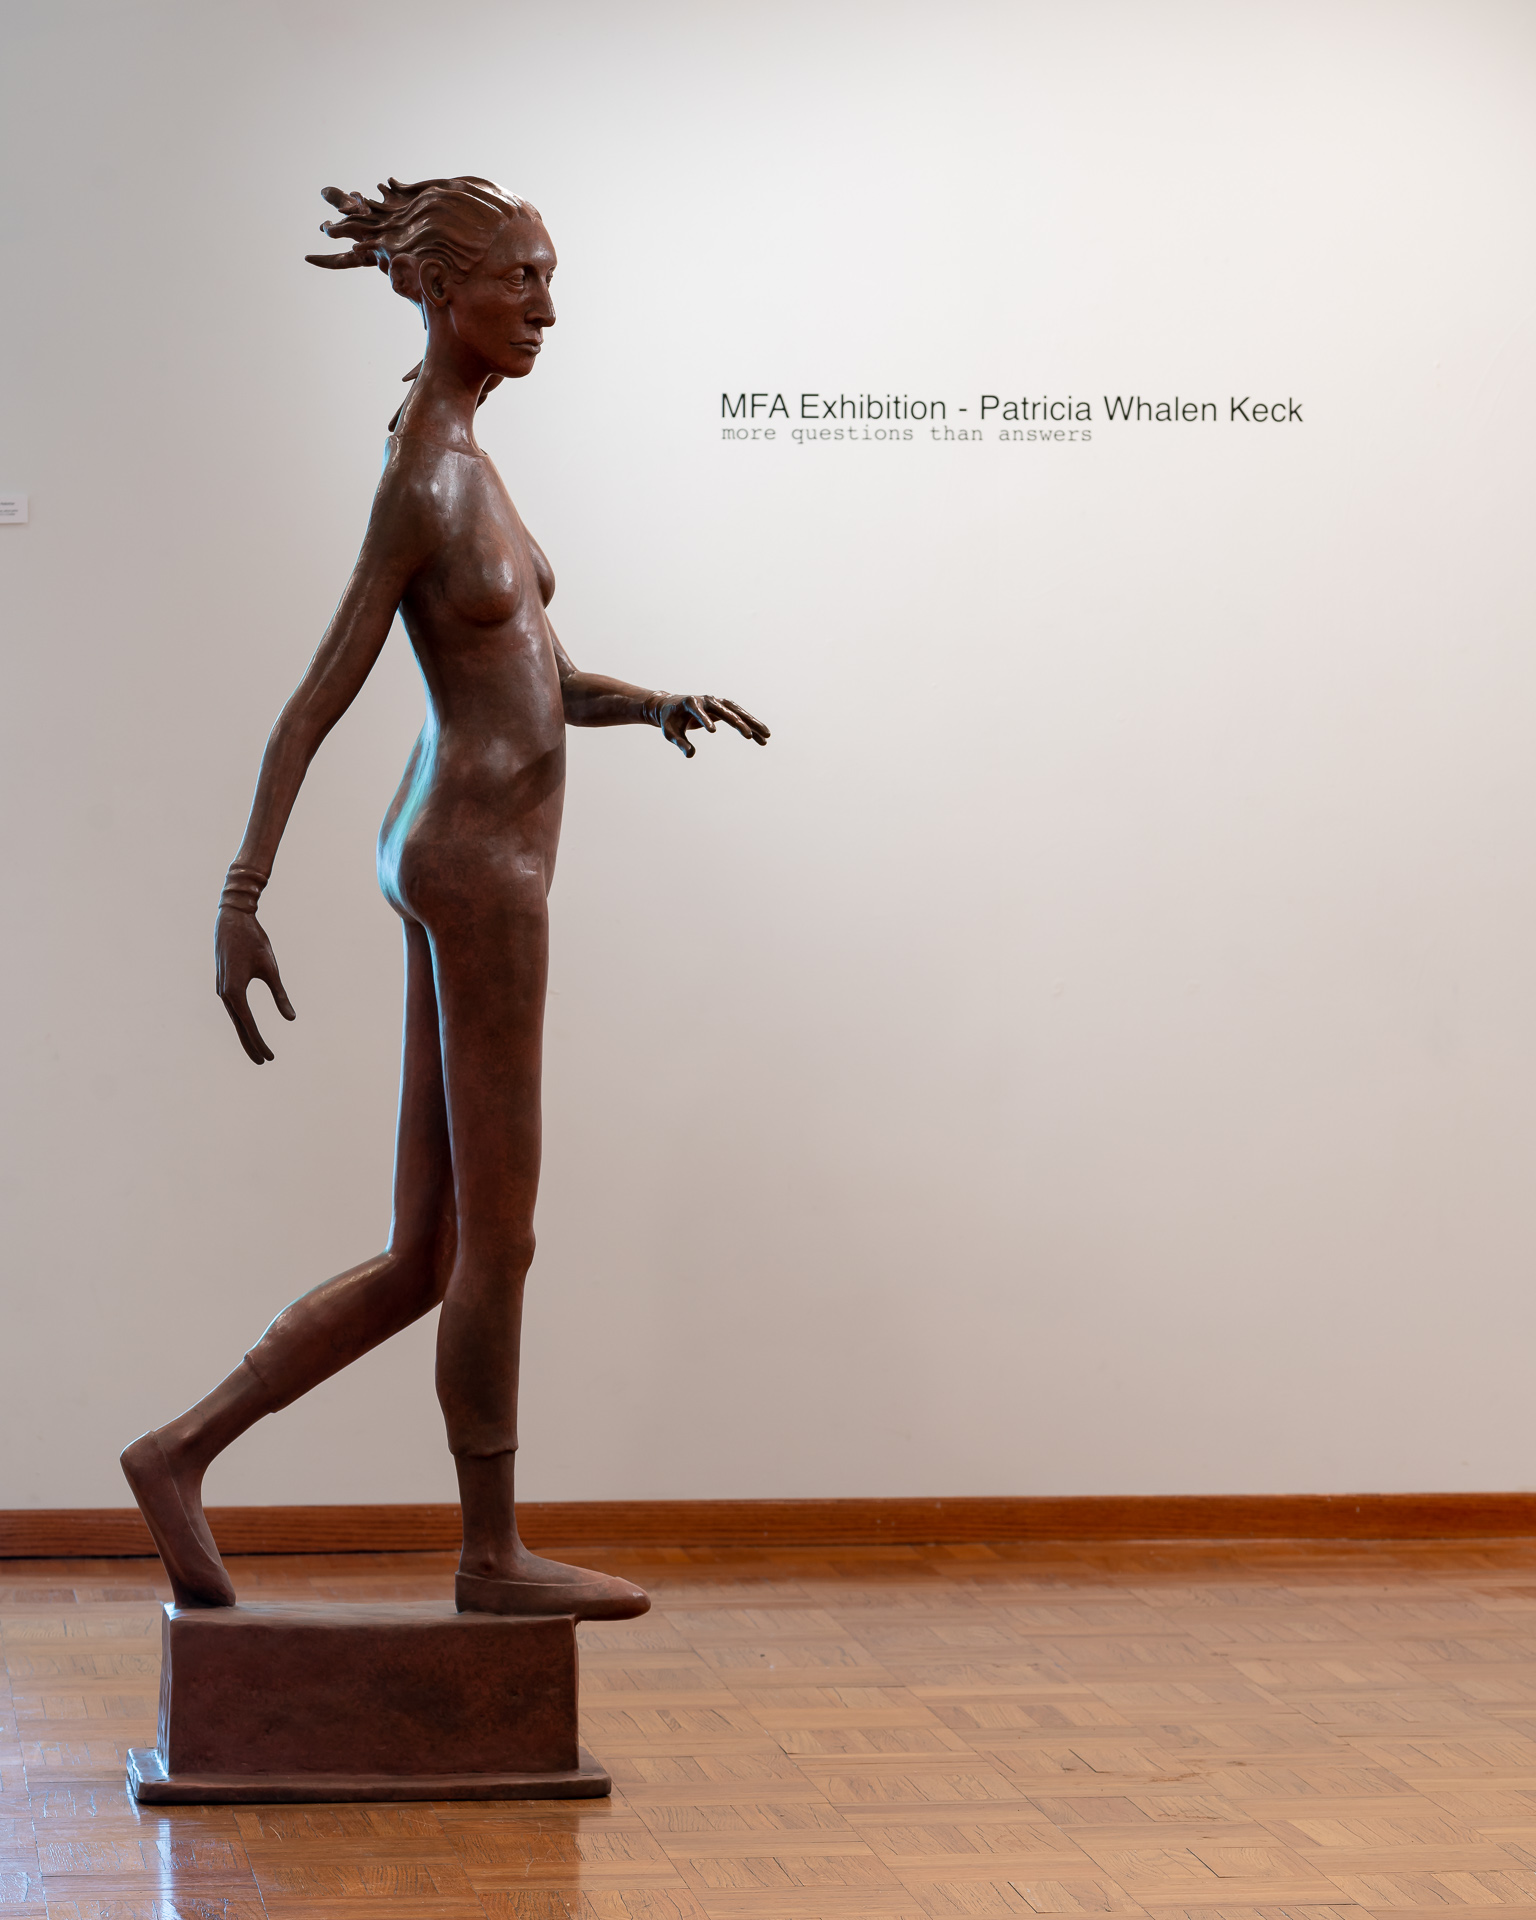 Image: Patricia Whalen Keck "The Pedestrian" Bronze. A large sculpture of a woman in a position that suggest she is walking or crossing across the space. The show title of the exhibition is seen on the wall in the background. Image courtesy of the artist